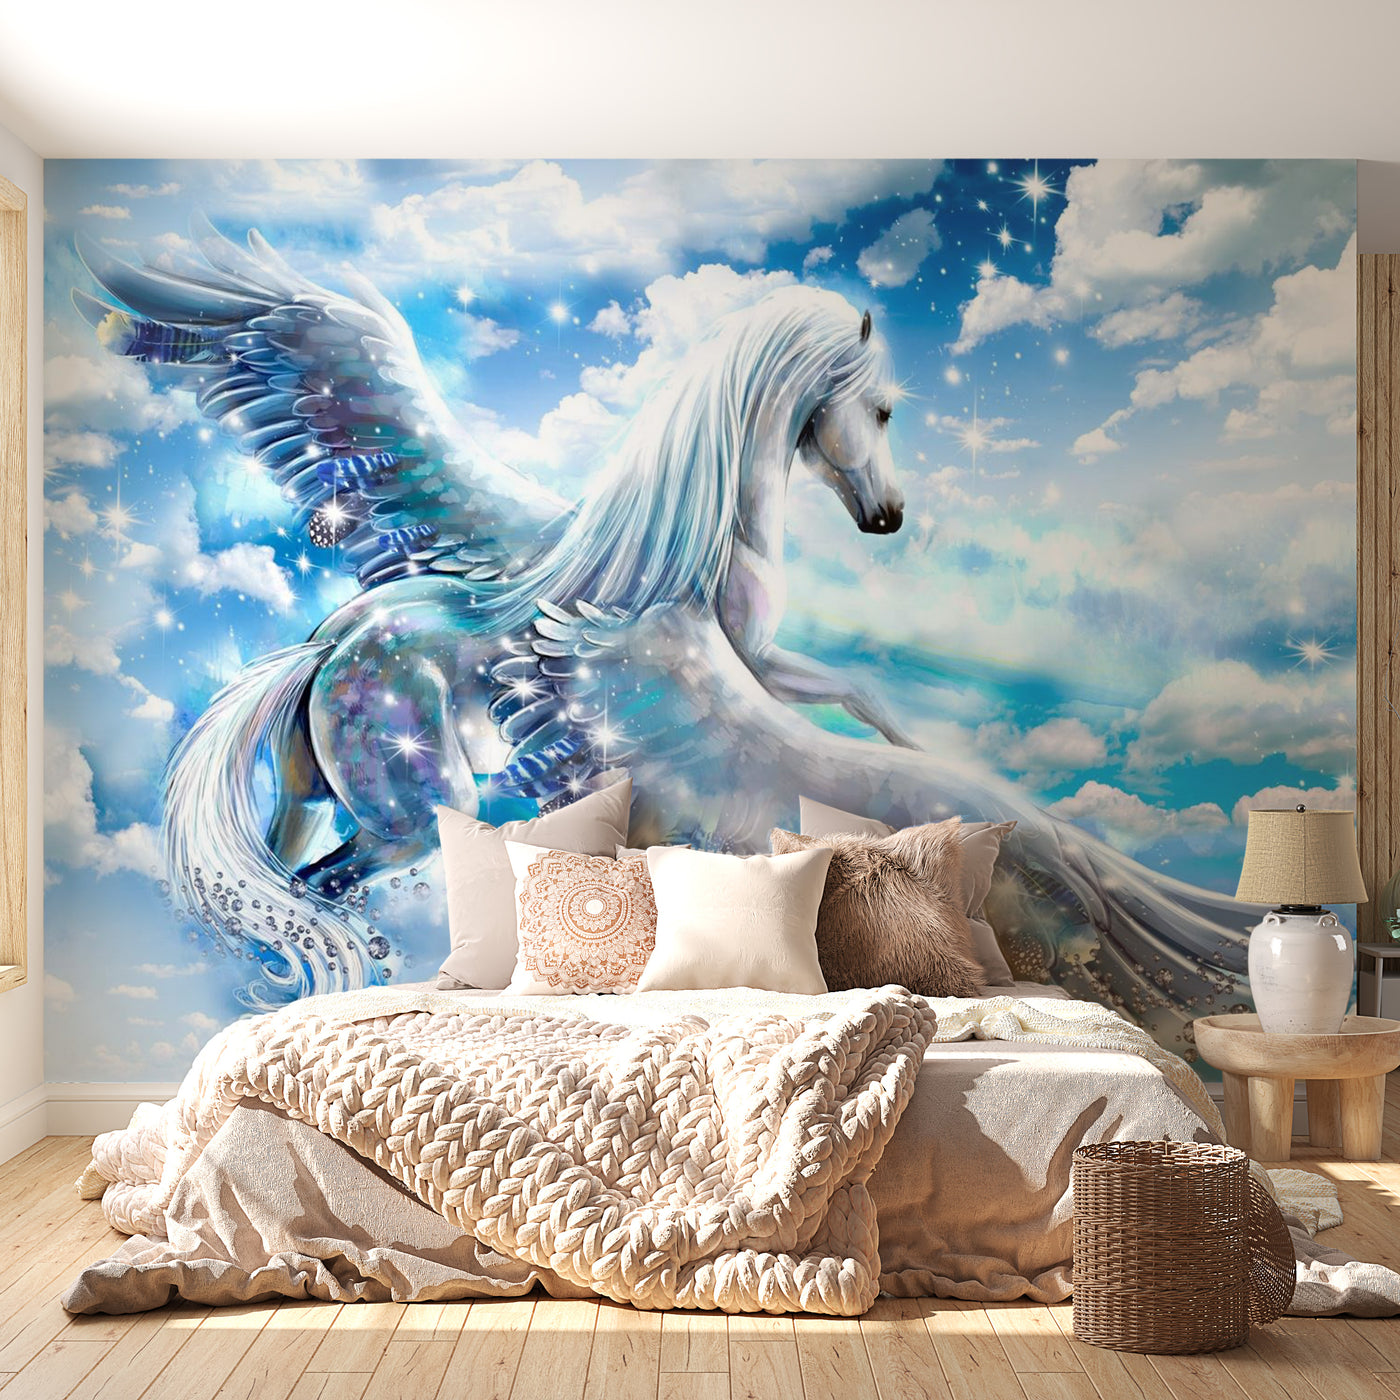 Peel & Stick Fantasy Wall Mural - Pegasus Blue - Removable Wall Decals